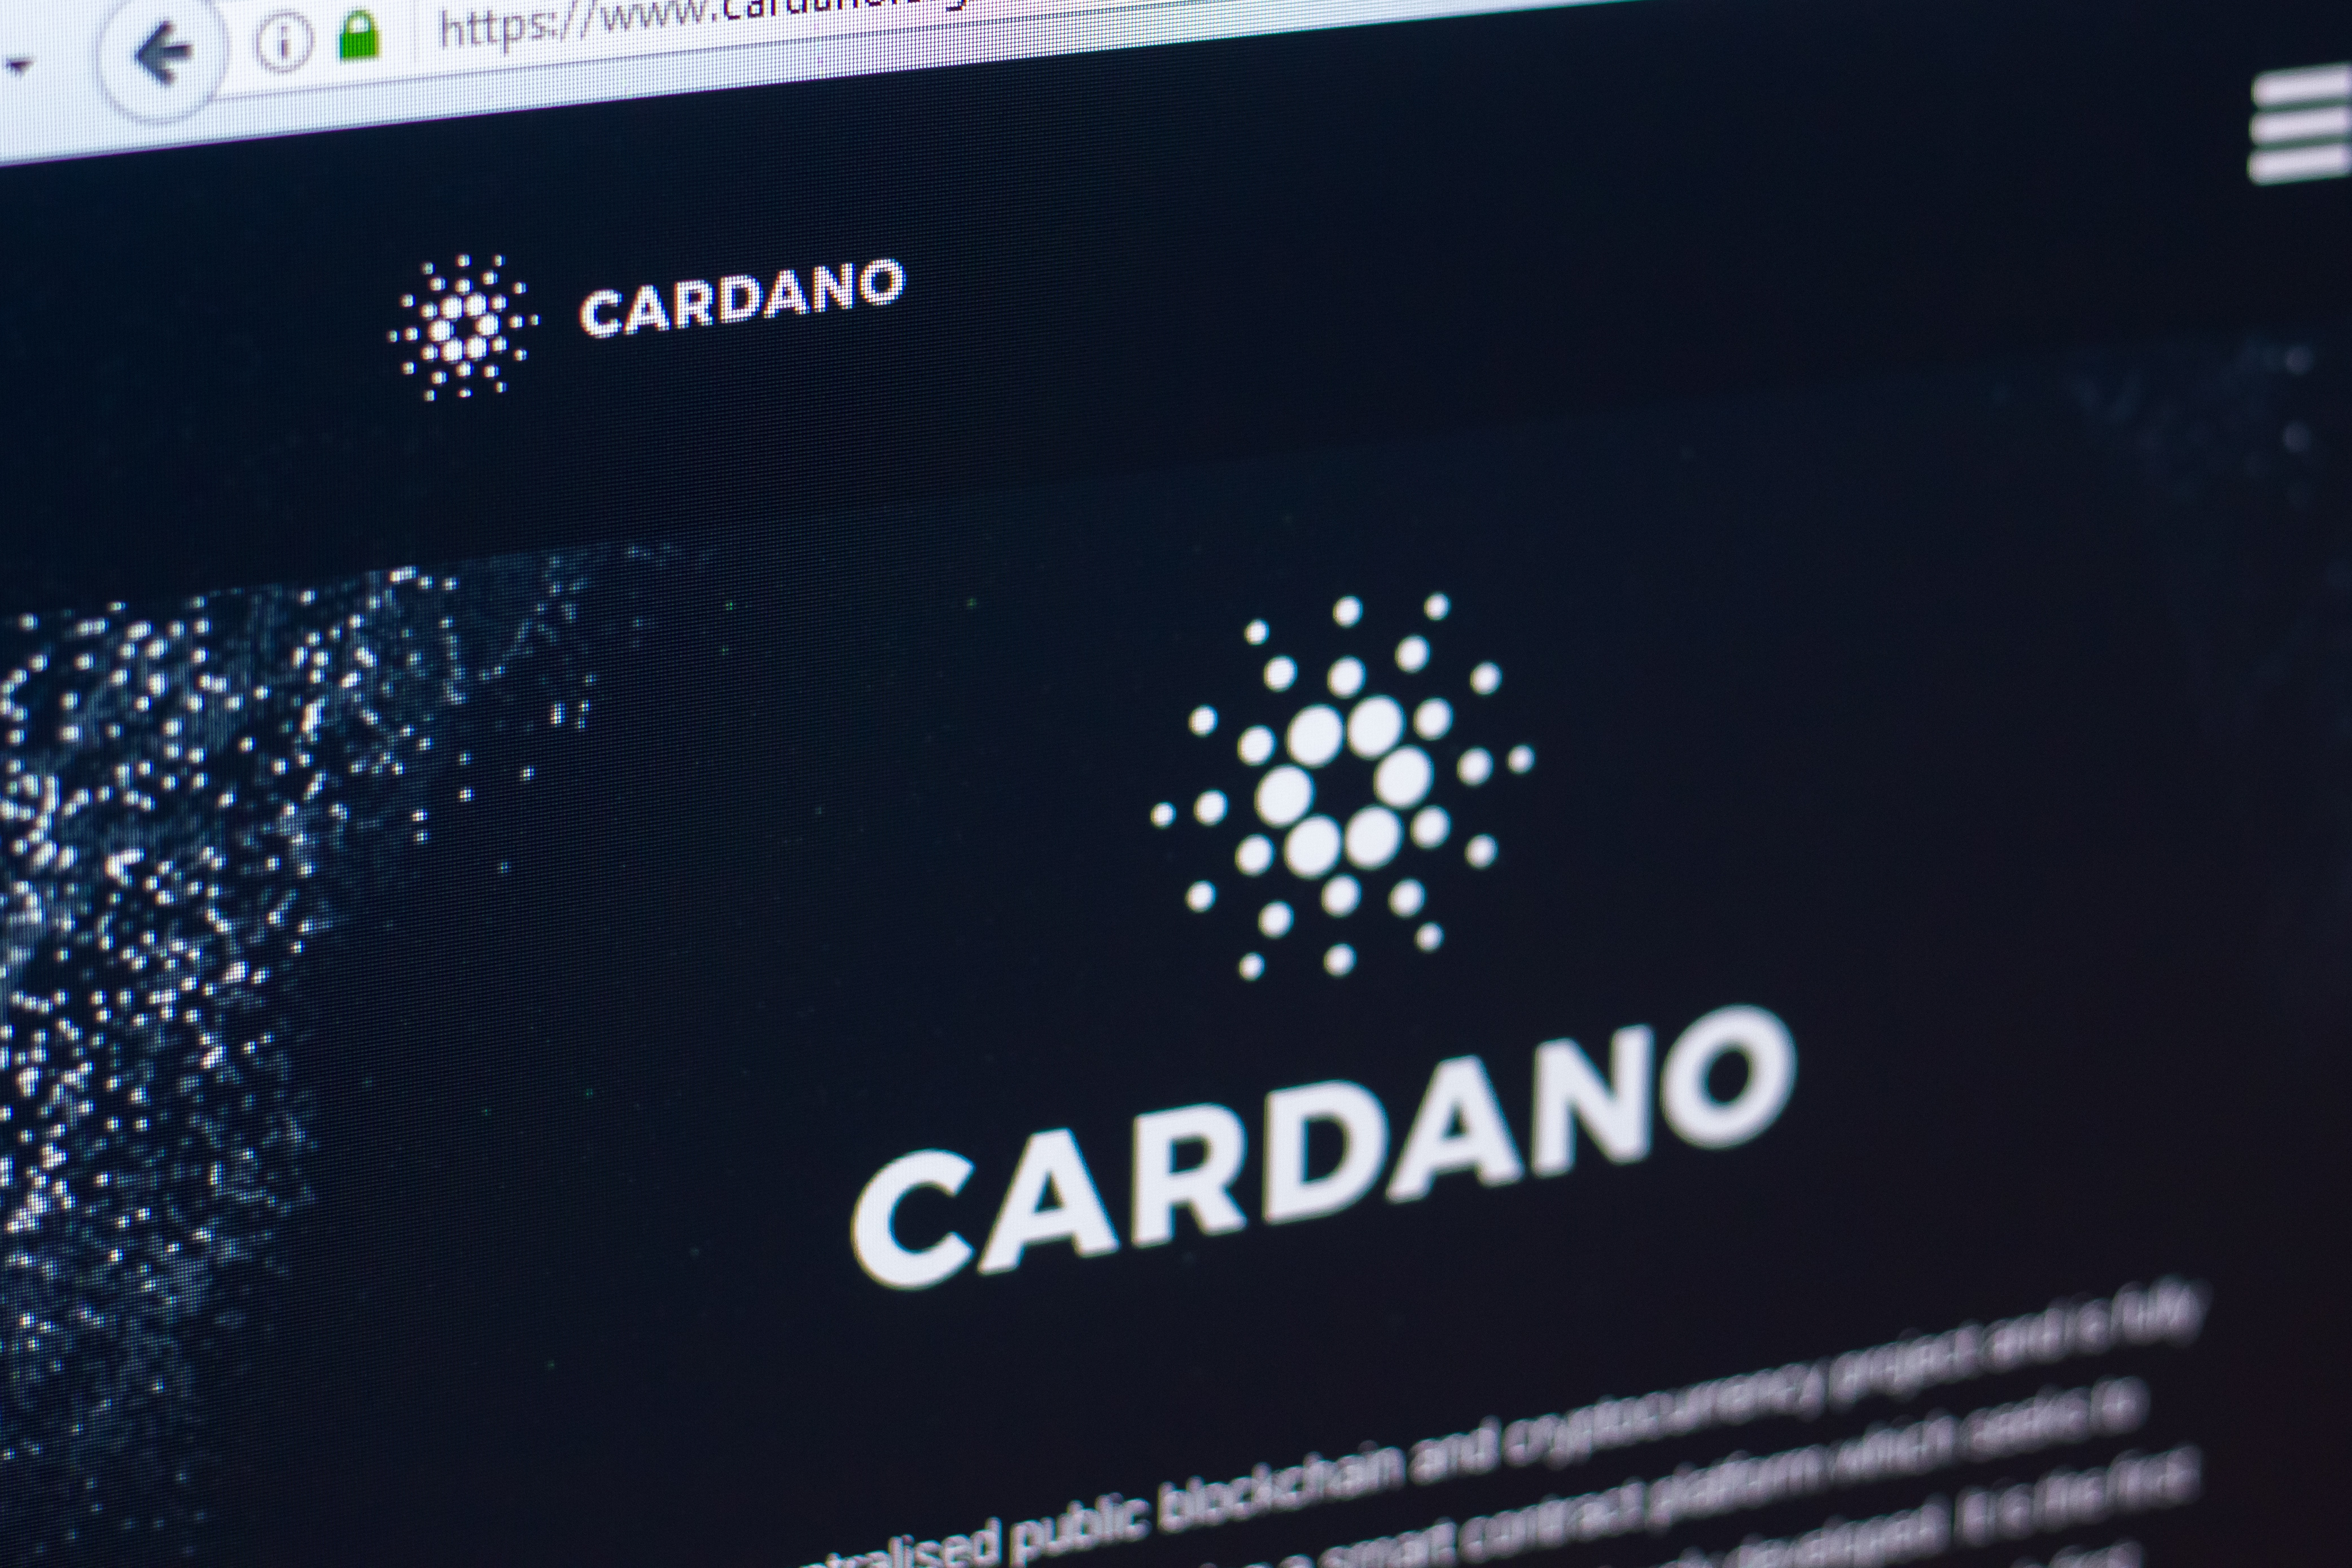 Exodus Wallet on Adding Cardano Native Tokens: “Never Say Never”